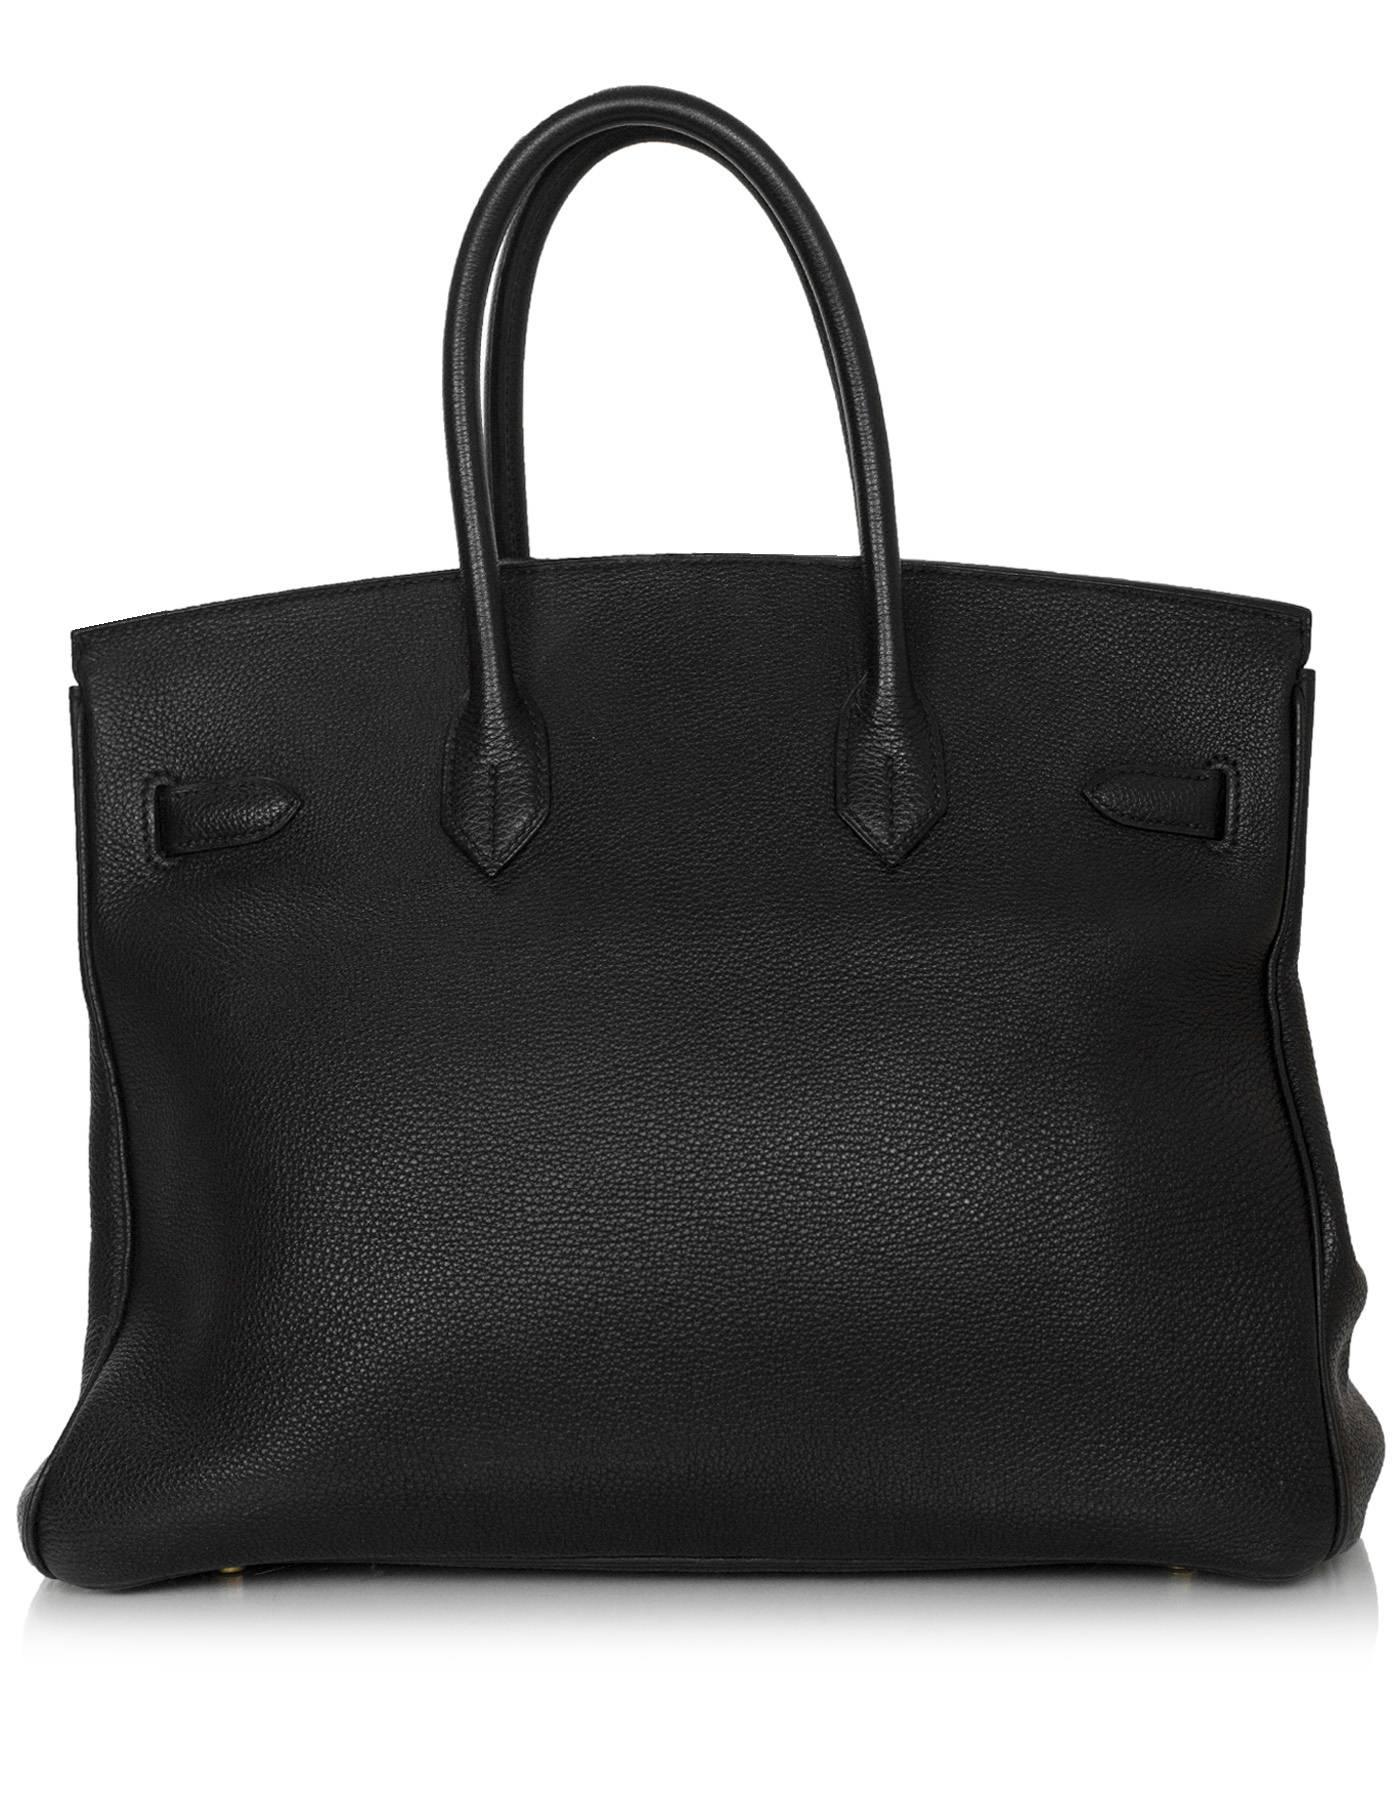 Hermes Black Togo 35cm Birkin Bag

Made In: France
Year of Production: 2003
Color: Black
Hardware: Goldtone
Materials: Togo leather
Lining: Black chevre leather
Closure/Opening: Flap top with two leather arms that come to center for twist